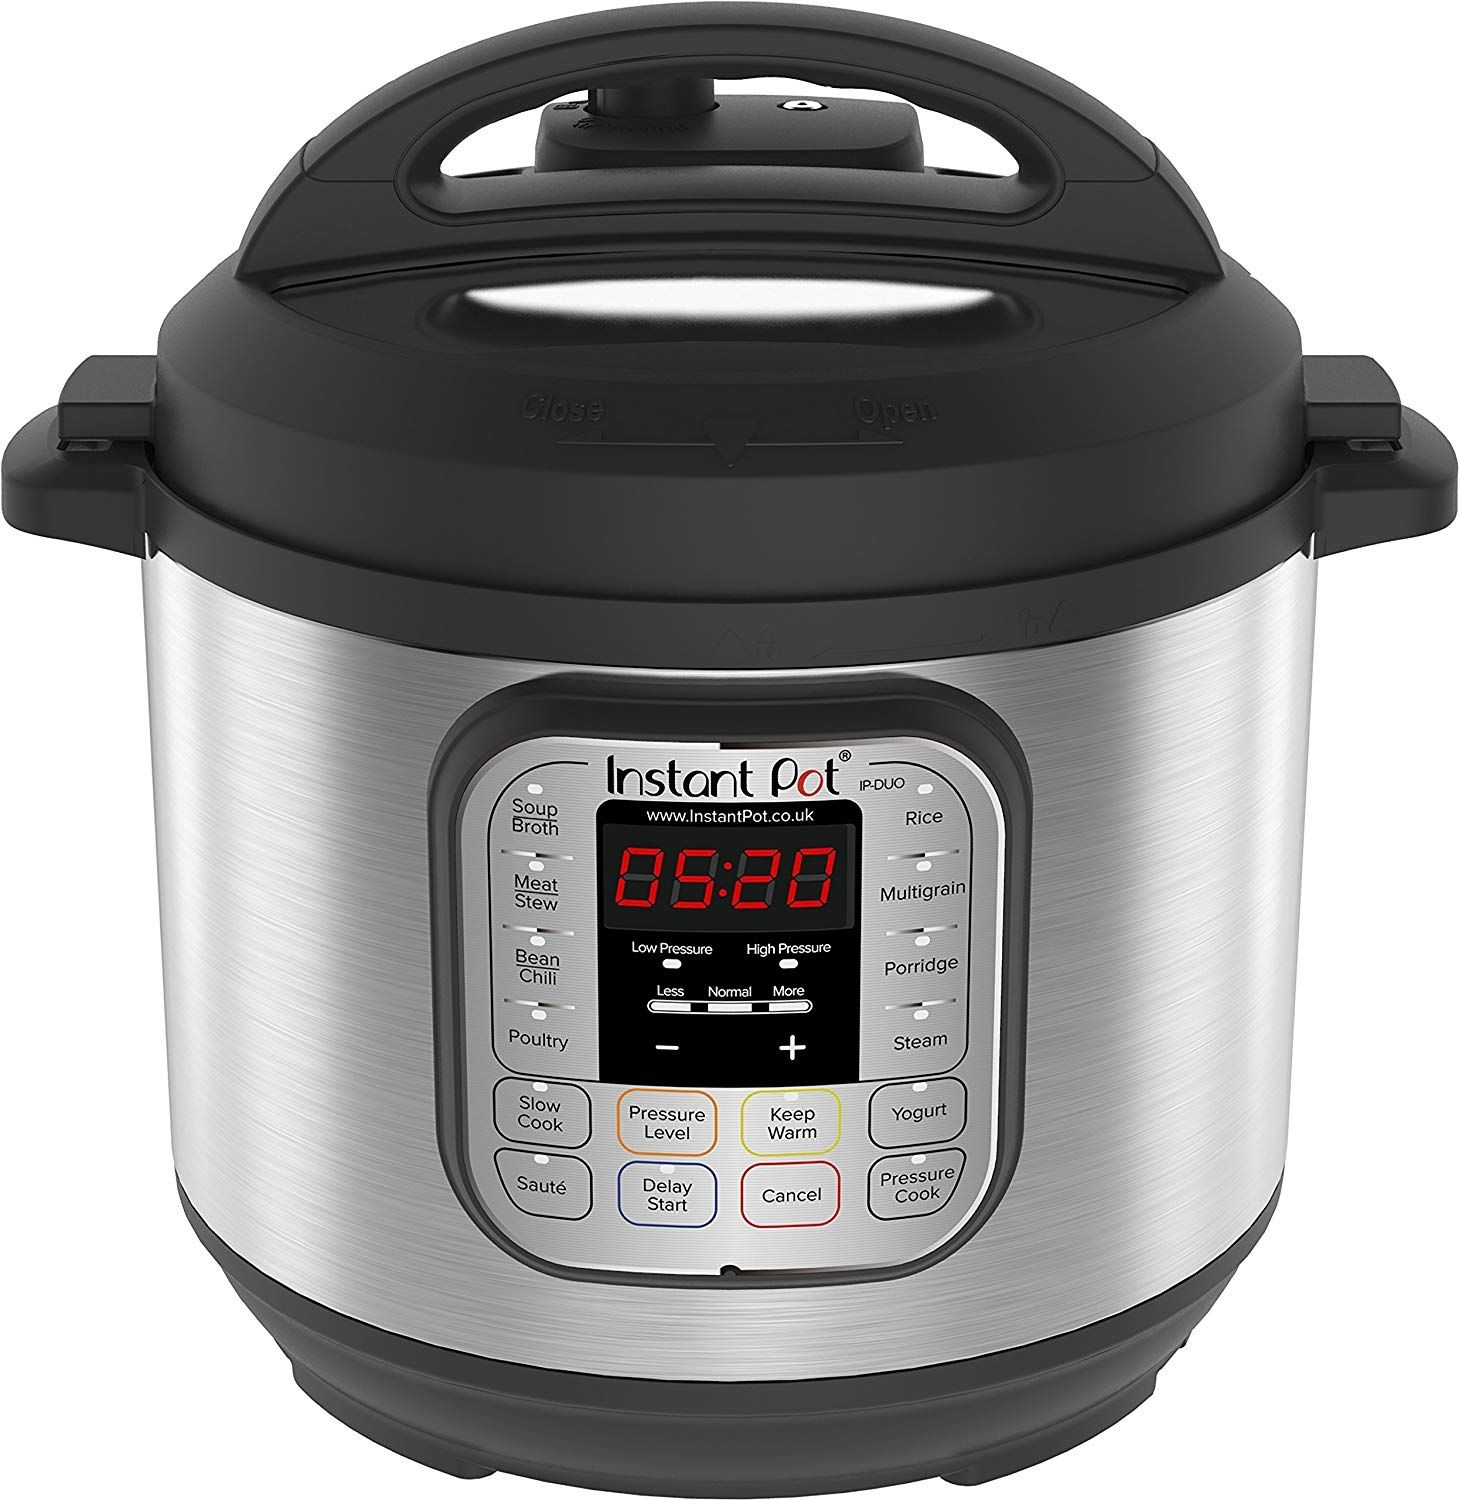 Is it safe to operate Instant Pot Duo 7-in-1 Electric Pressure